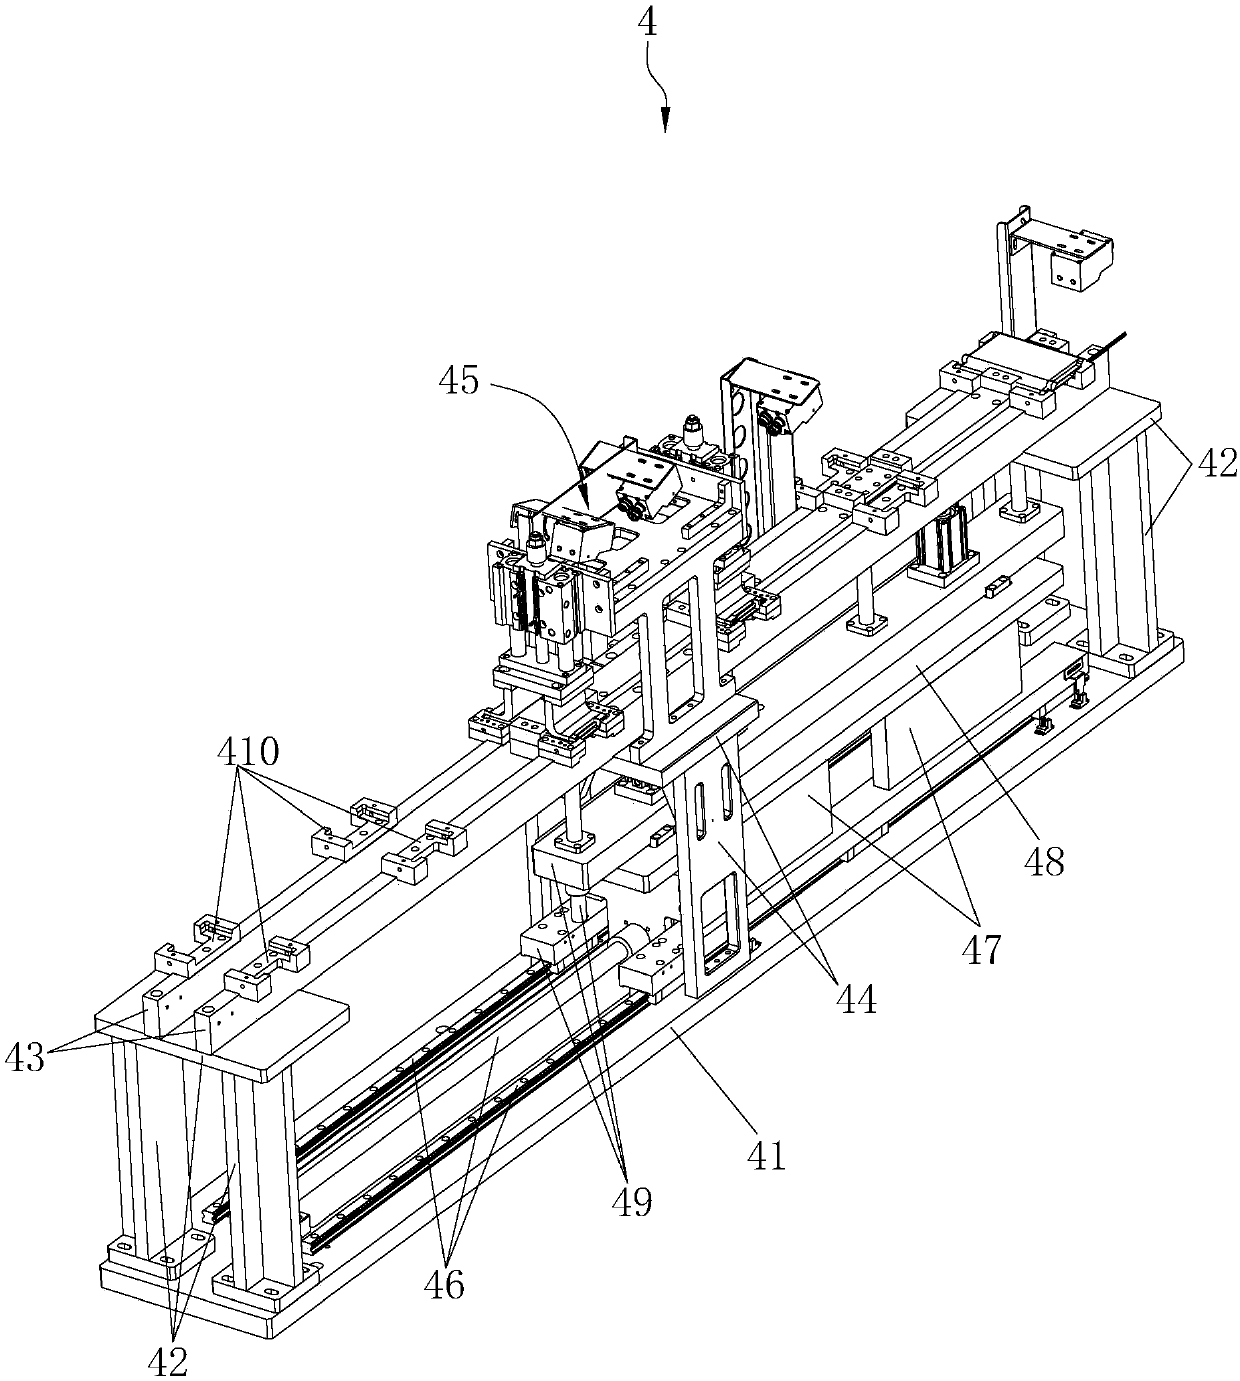 Full-electrode-lug cell automatic assembly line